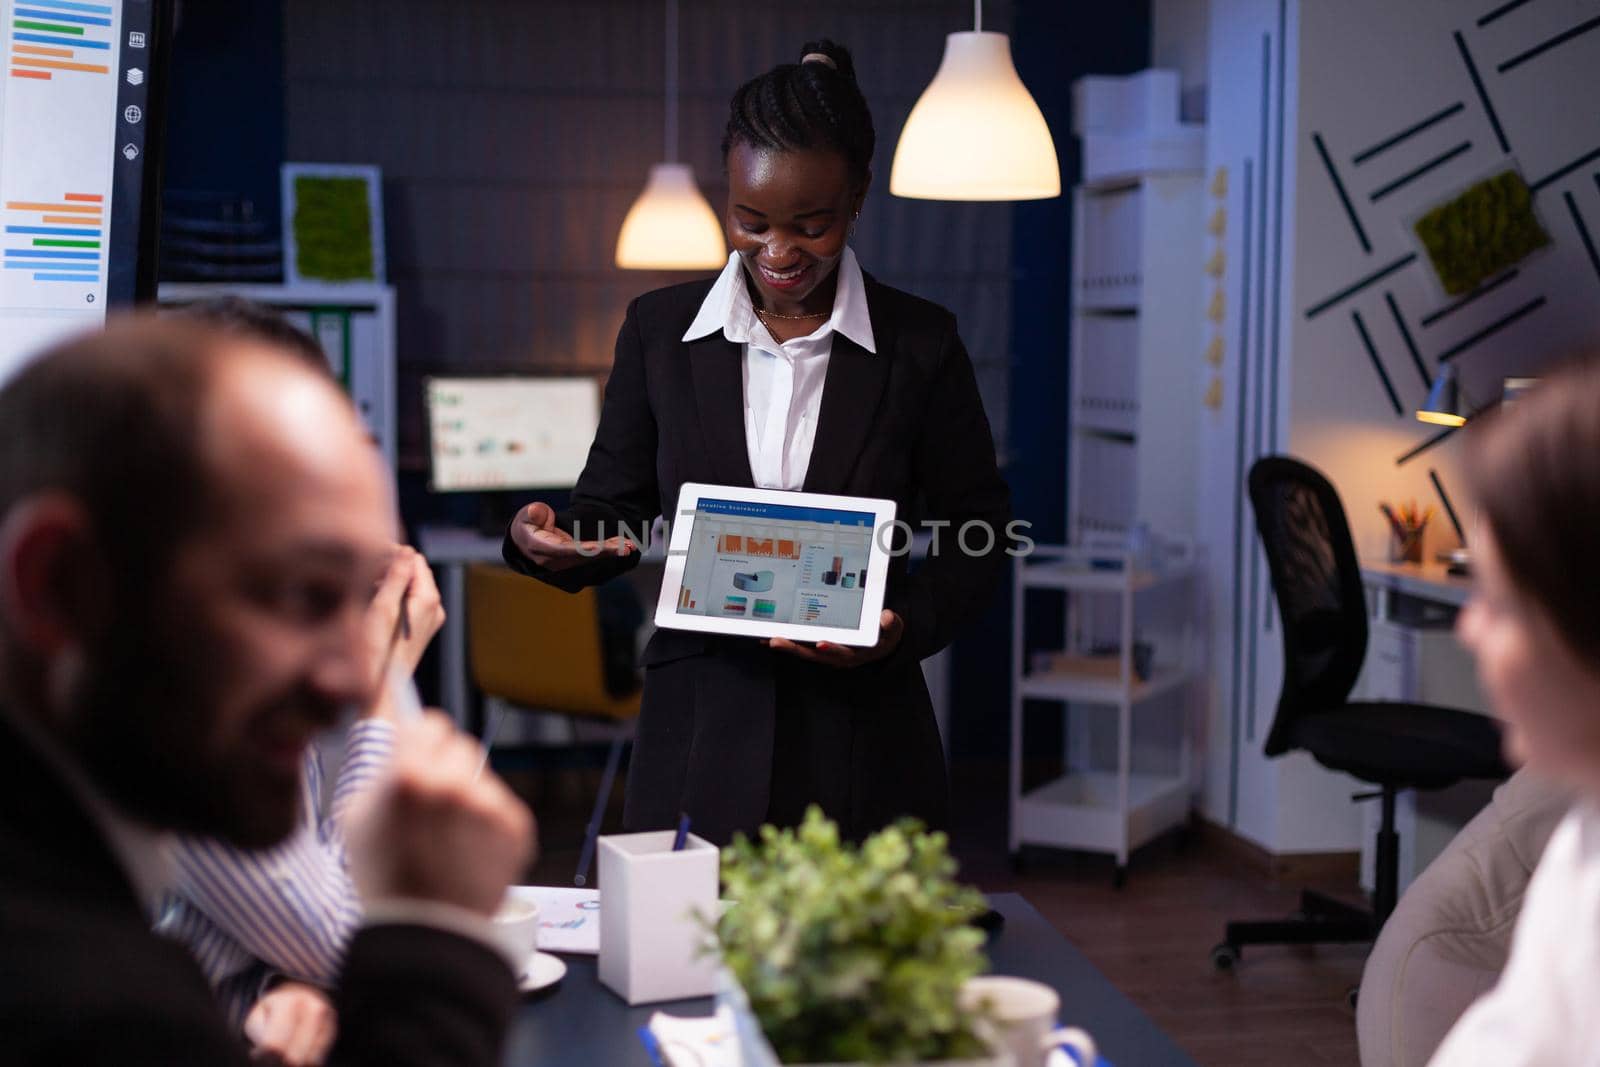 Entrepreneur woman with dark skin overworking in company office meeting room explaining management strategy using tablet. Workaholics multi-ethnic businesspeople brainstorming late at night.